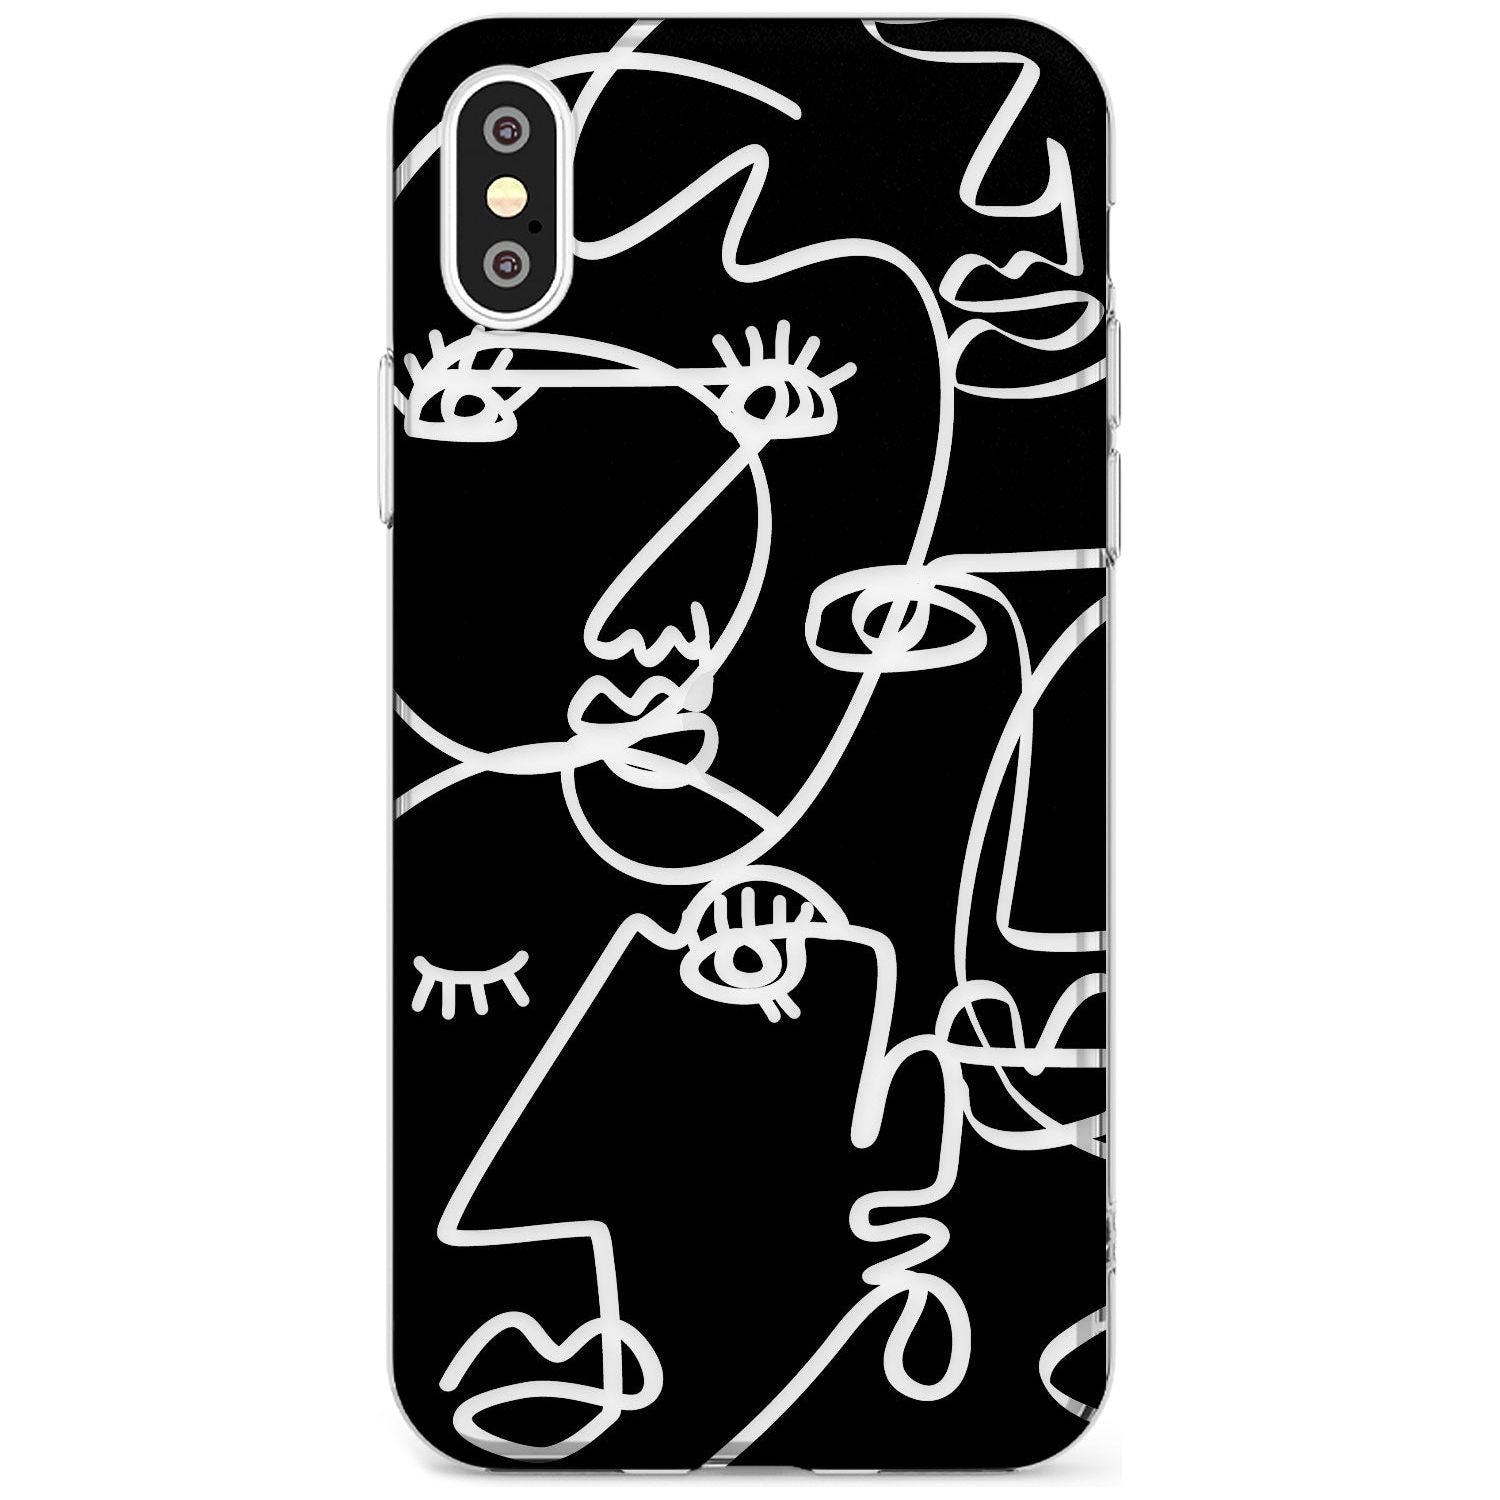 Continuous Line Faces: Clear on Black Black Impact Phone Case for iPhone X XS Max XR